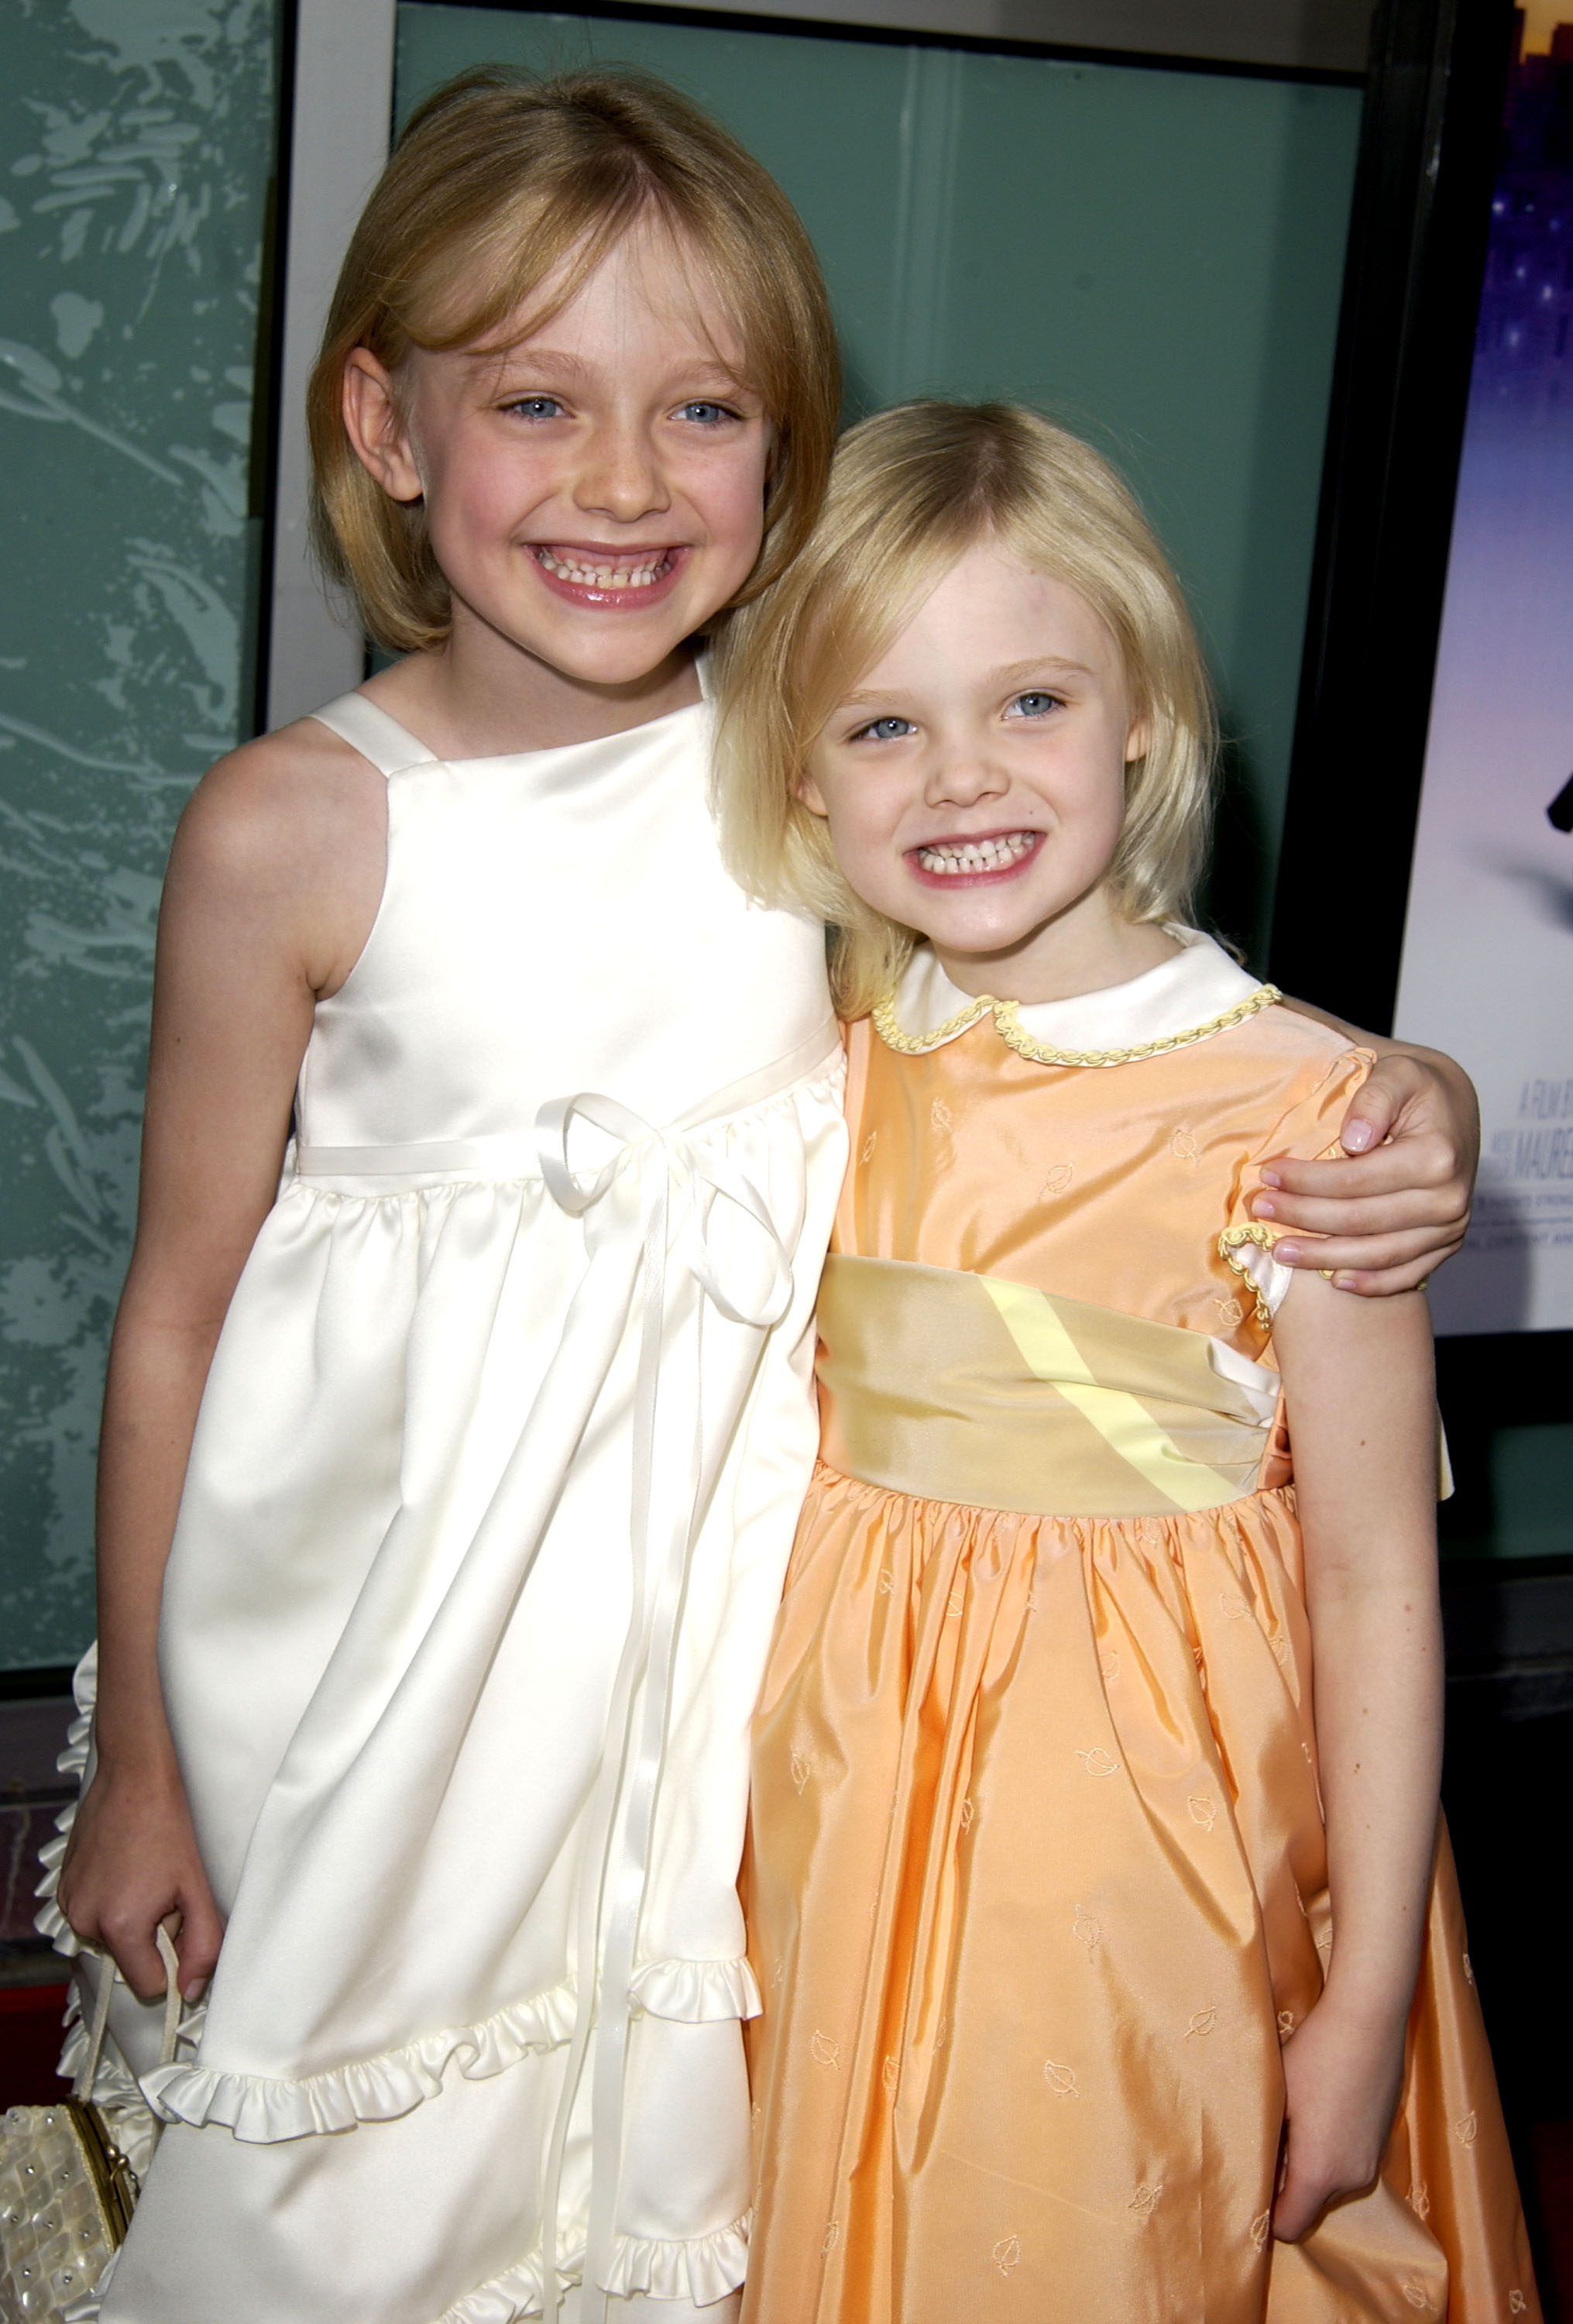 the sisters as kids at an event